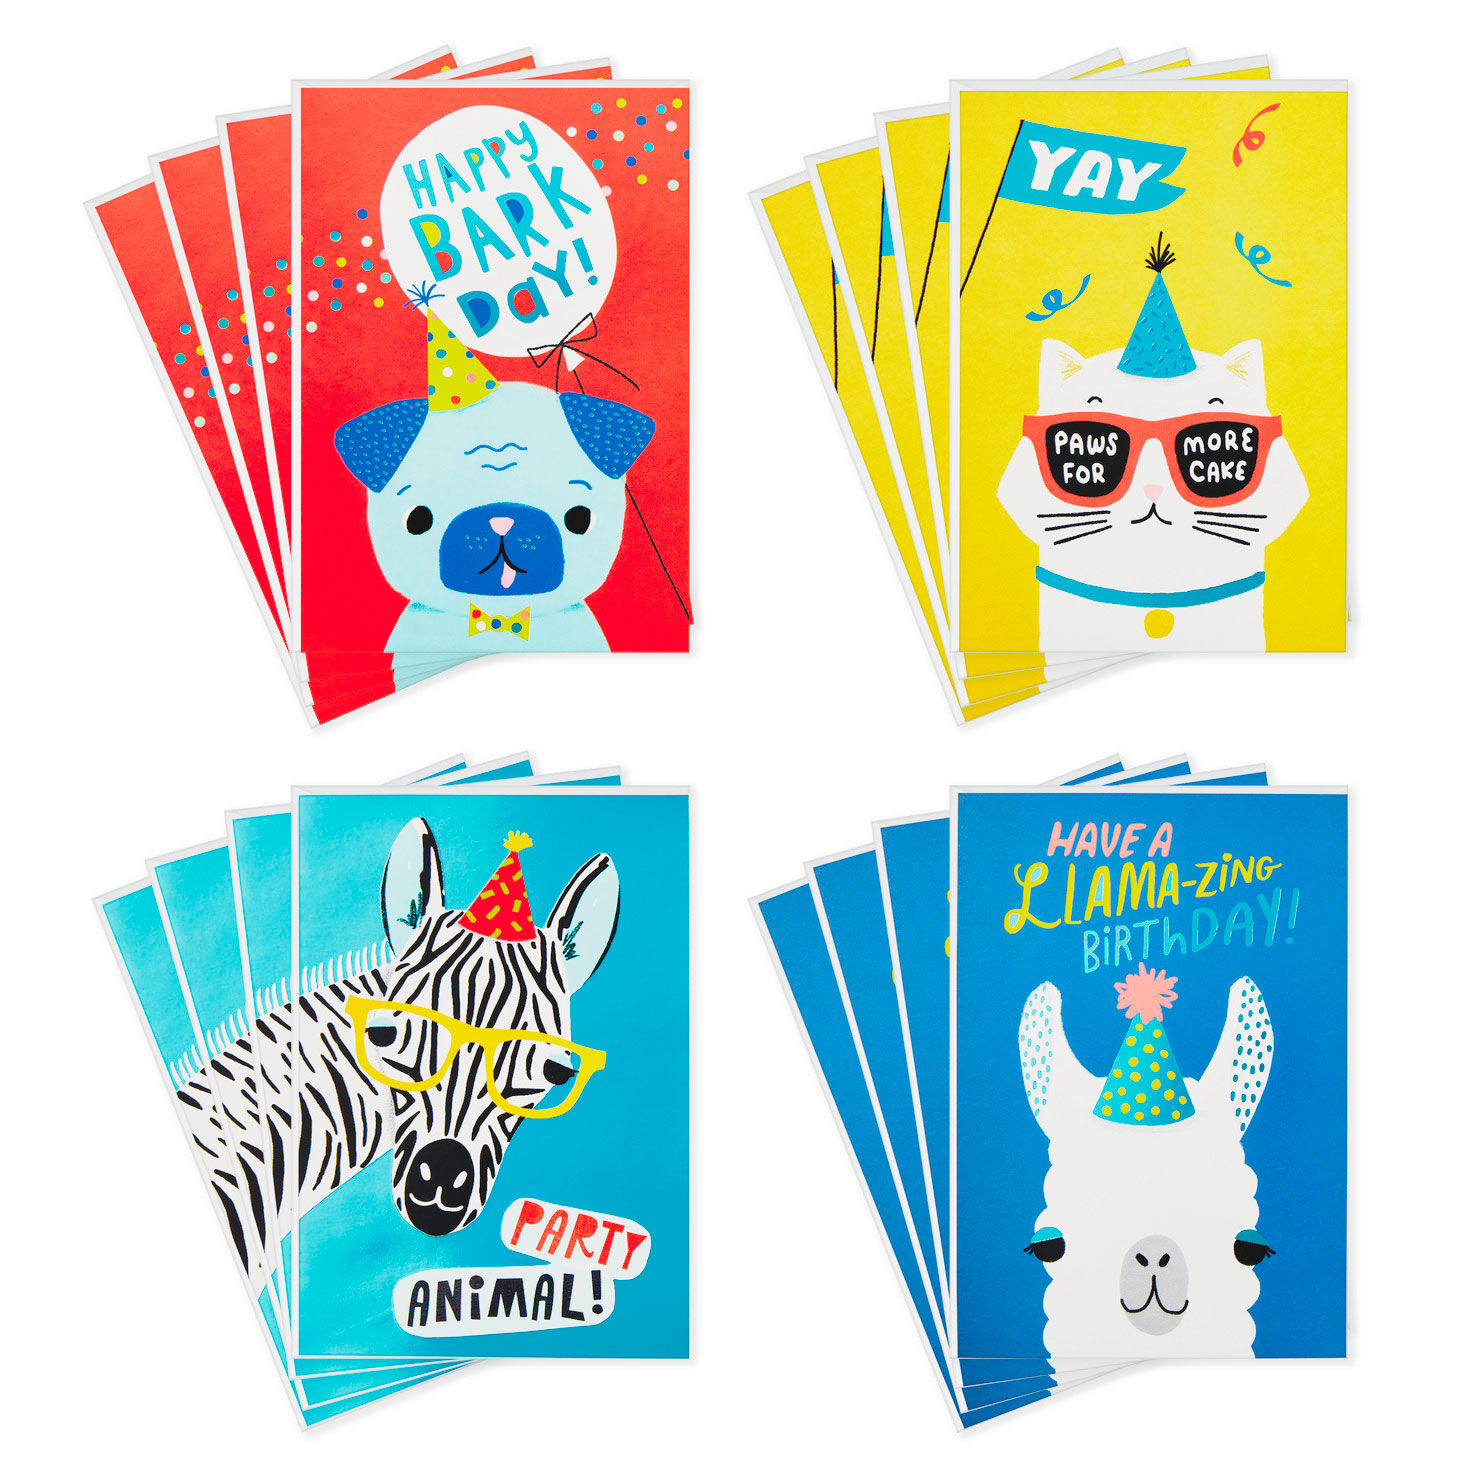 Party Animals Assortment Boxed Birthday Cards for Kids, Pack of 16 for only USD 9.99 | Hallmark